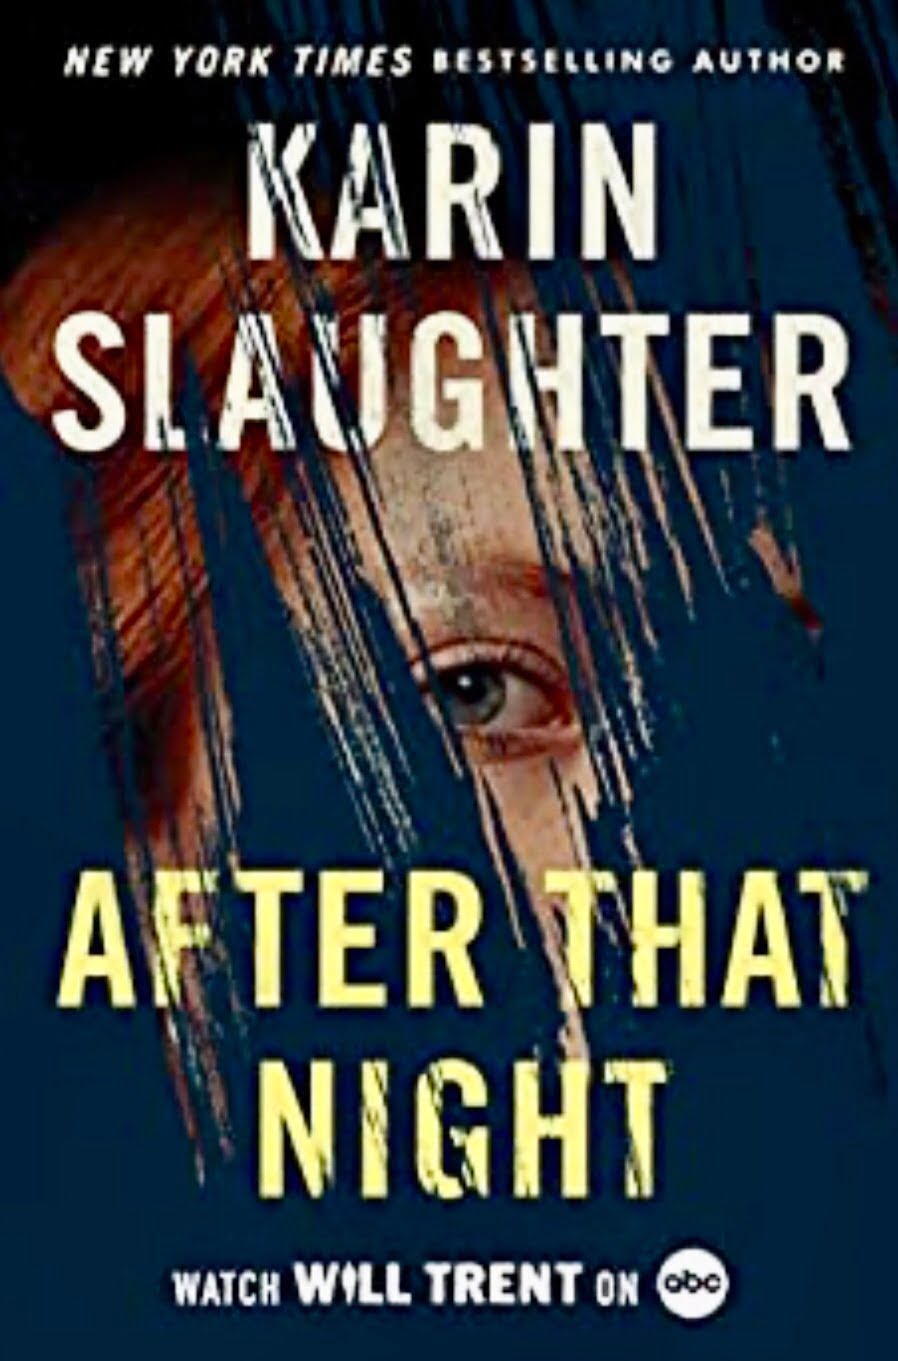 AFTER THAT NIGHT BY KARIN SLAUGHTER – BOOK REVIEW